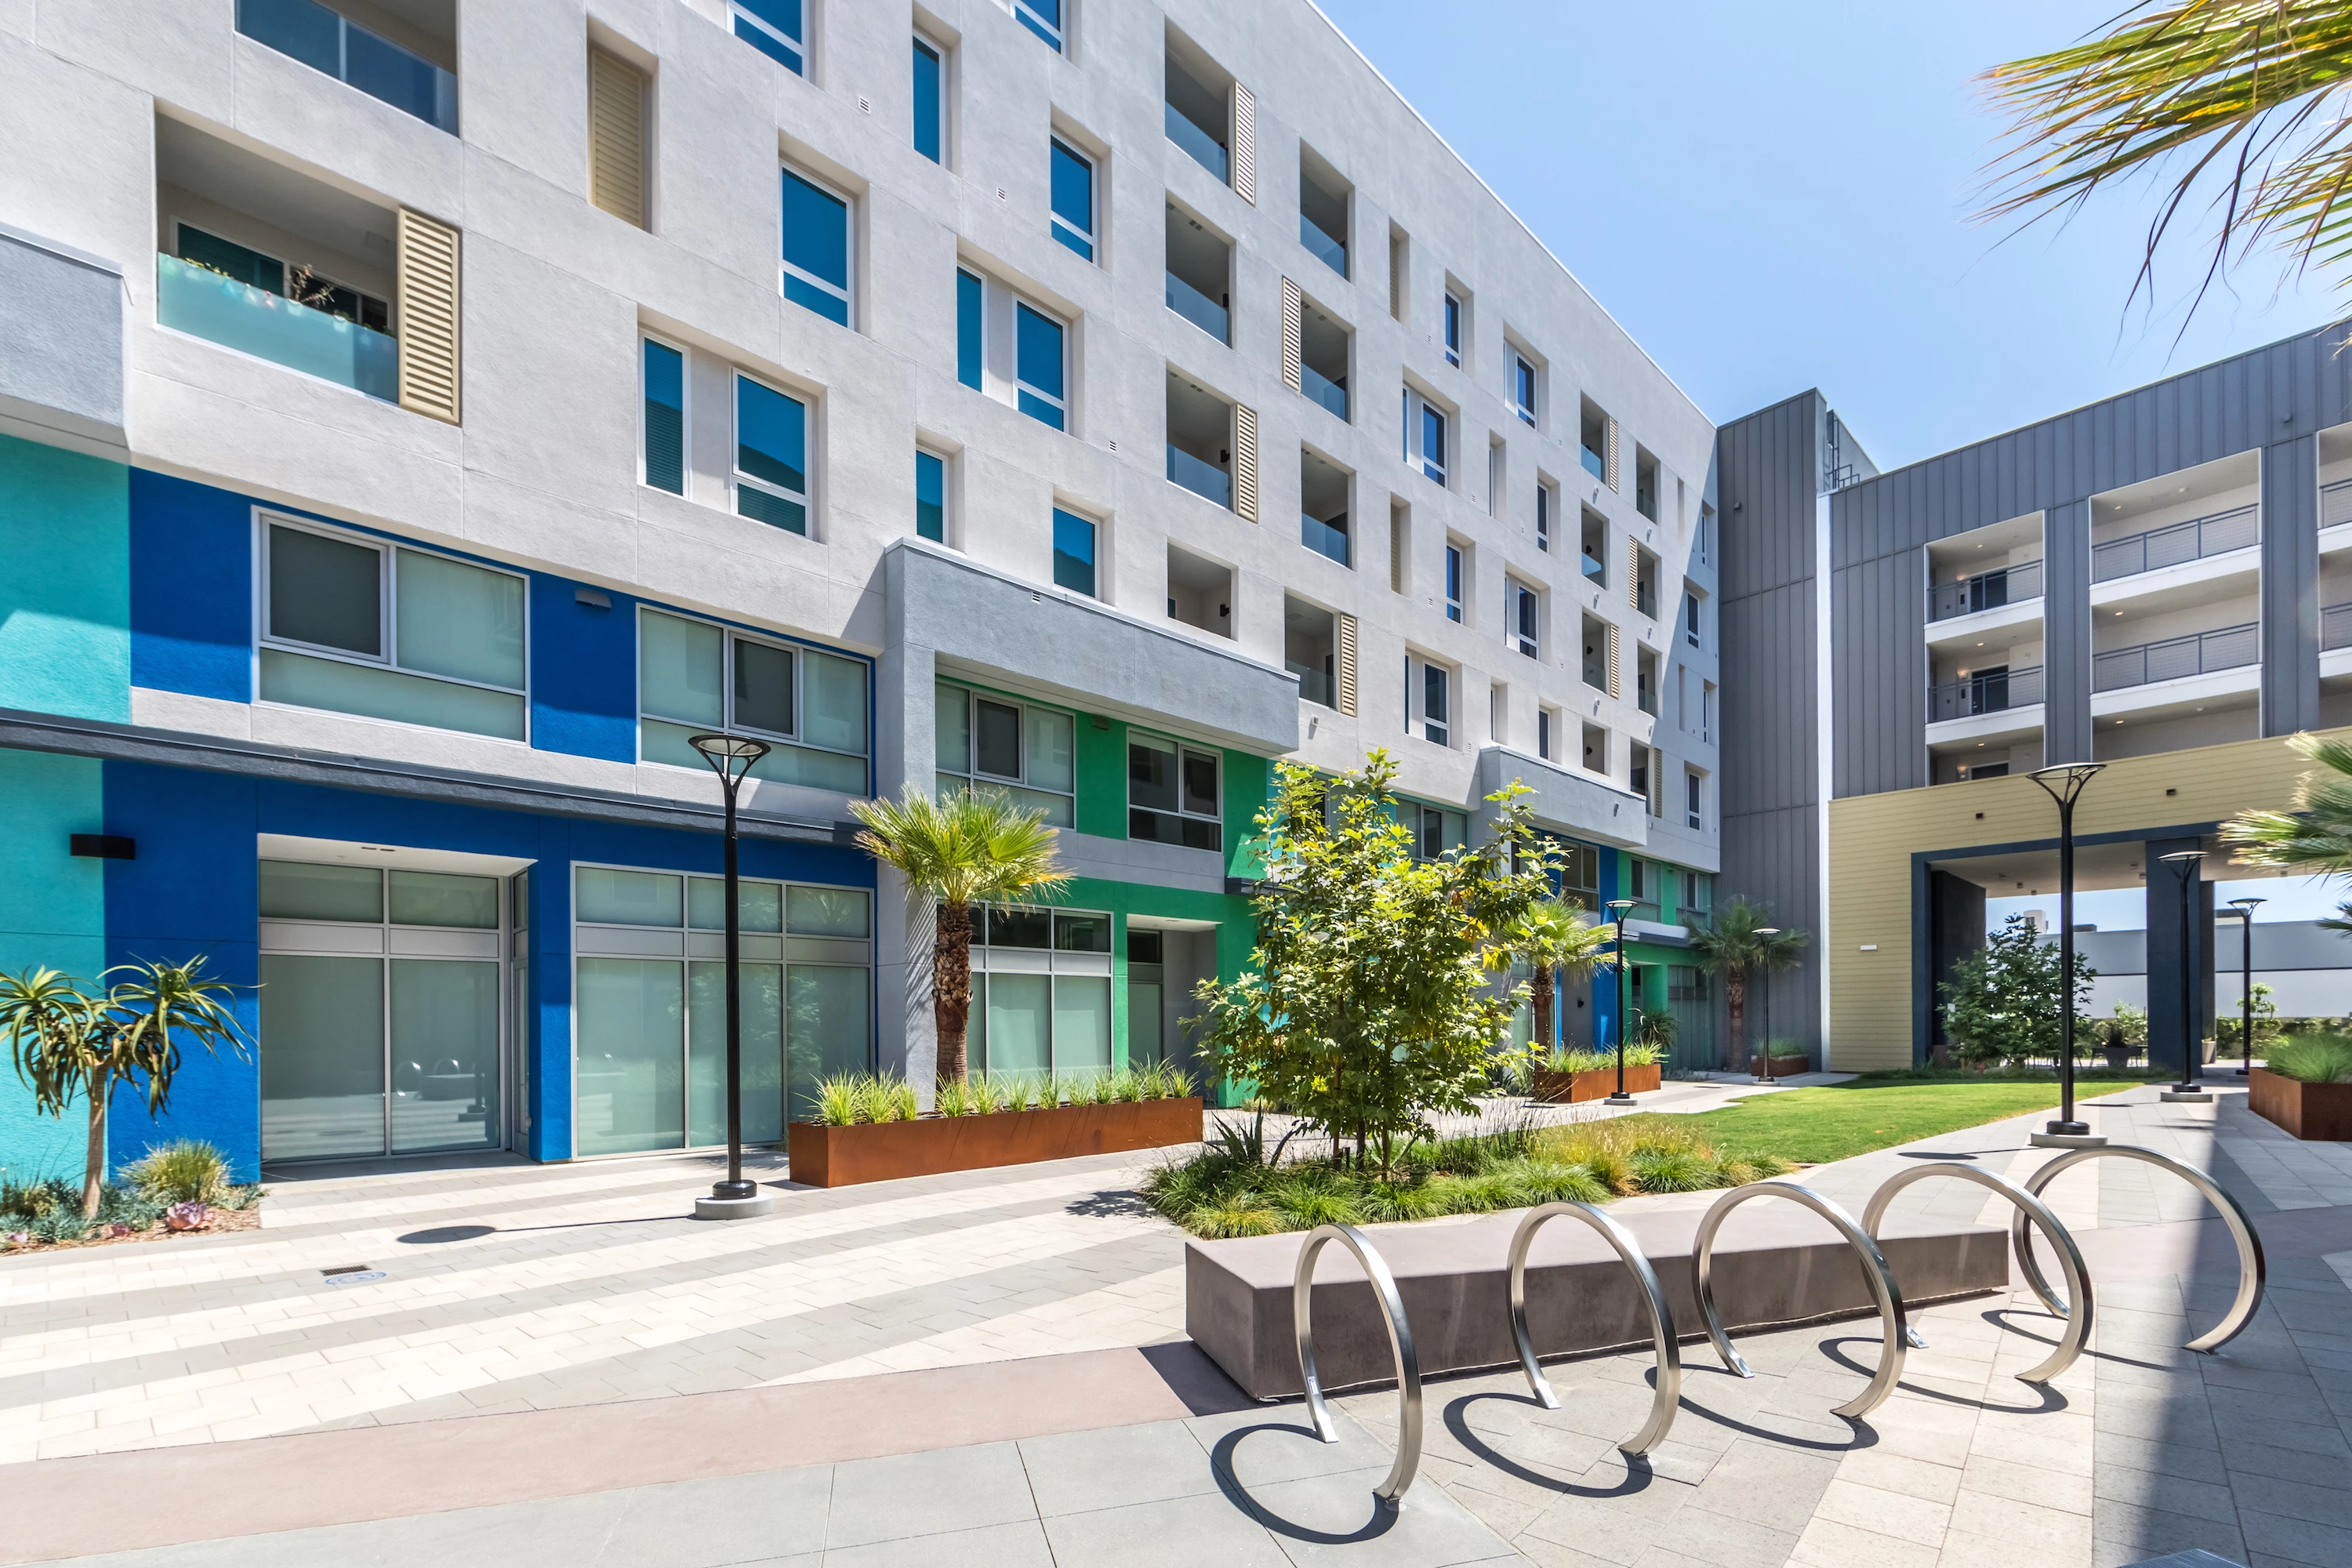 1251-17-exterior-front-courtyard-bike-racks-at-vela-on-ox-apartments-in-woodland-hill.jpg